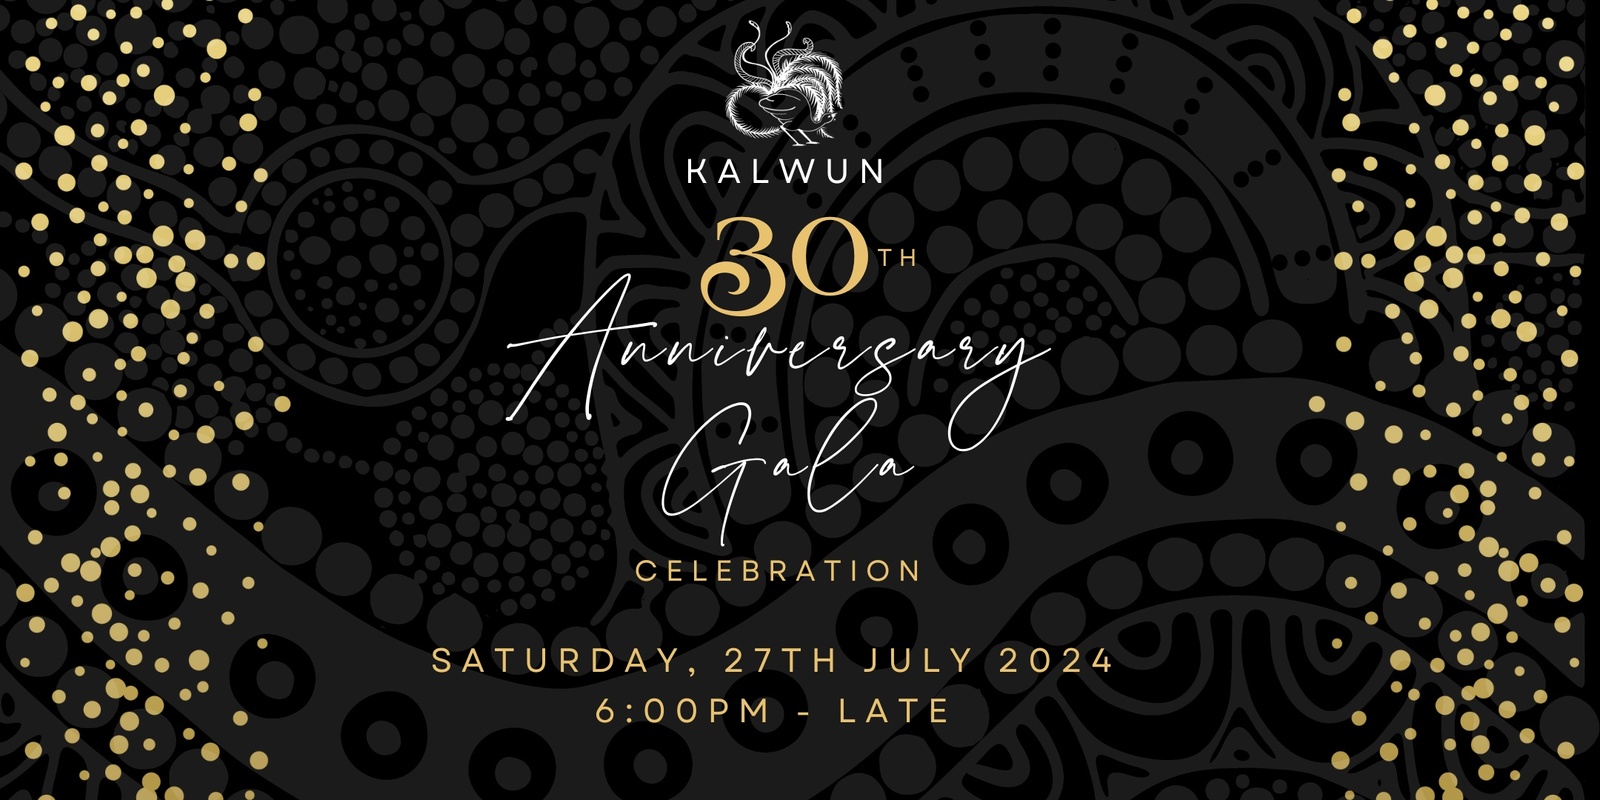 Banner image for Kalwun 30th Anniversary Gala Celebration